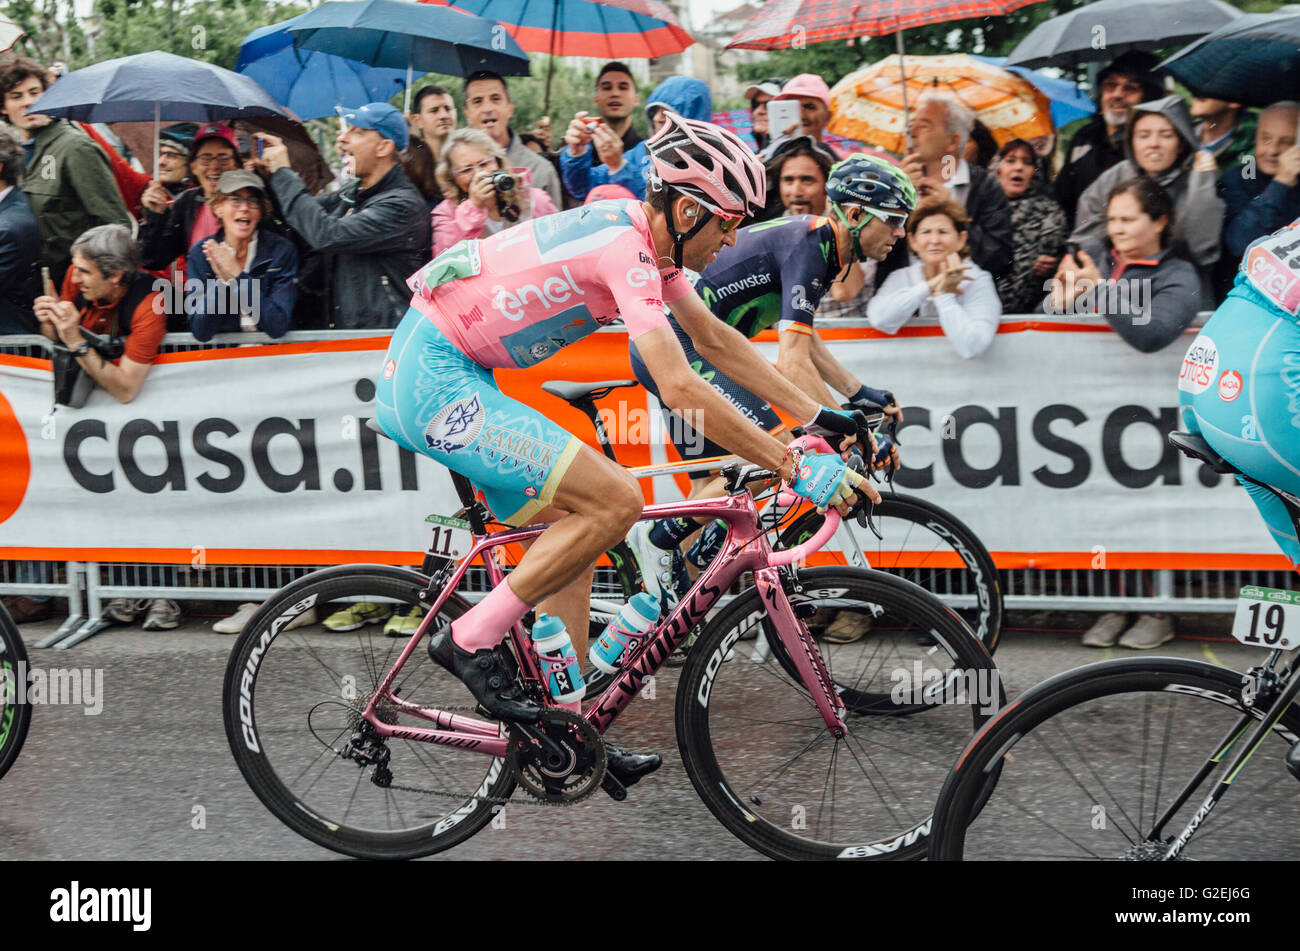 Torino, Italy, May 29th 2016. Vinenco Nibali from Astana seen in action at the final stage (Torino) of the Giro d’Italia 2016. Credit:  Gonzales Photo - Alberto Grasso. Stock Photo